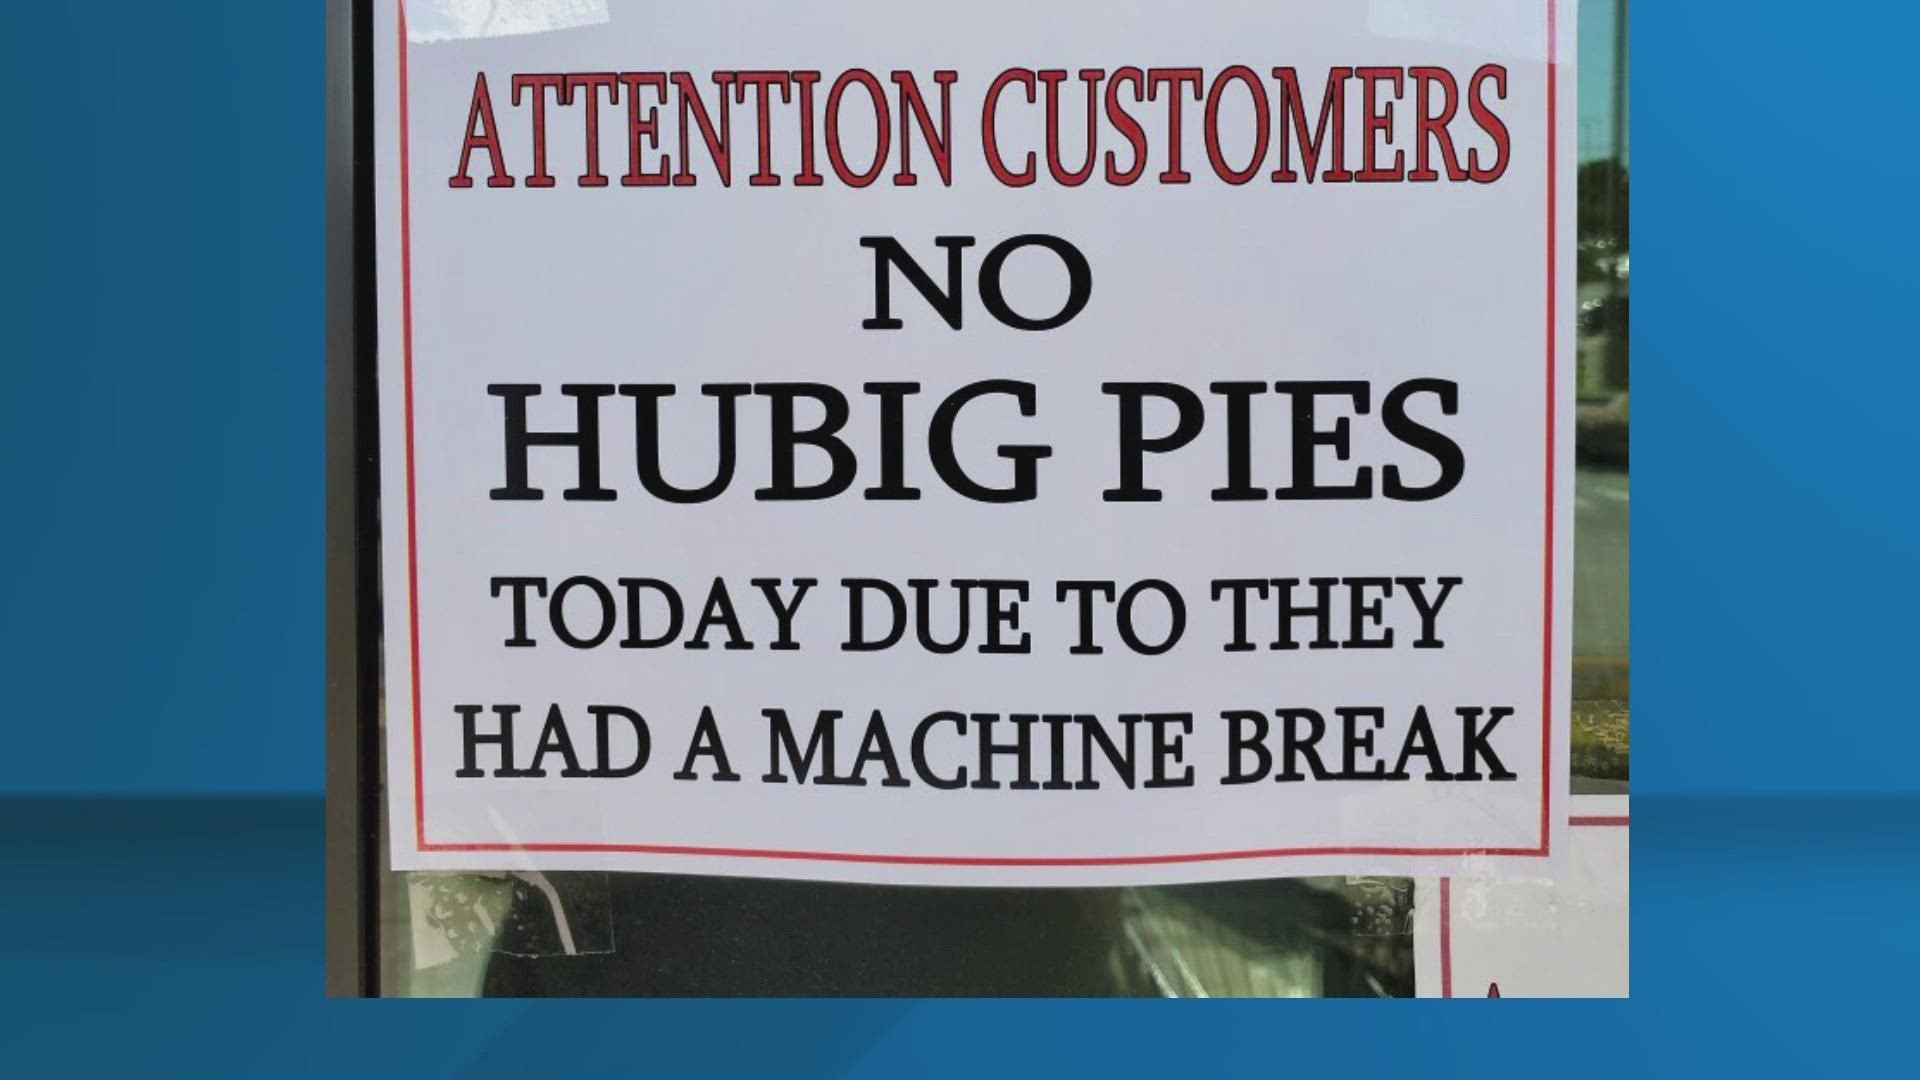 After selling more than 10,000 pies at a pop-up location last week, Hubig's Pies was poised to open big by bringing pies to retail stores across New Orleans today.